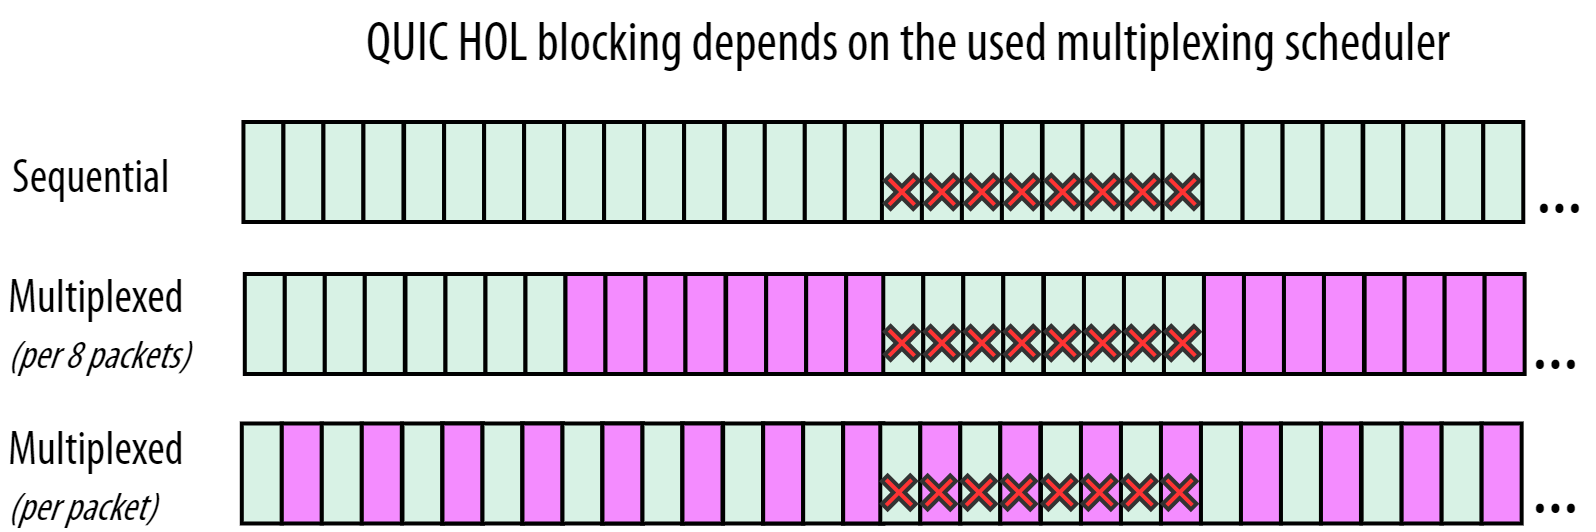 impact of stream multiplexing on HOL blocking prevention in HTTP/3 over QUIC